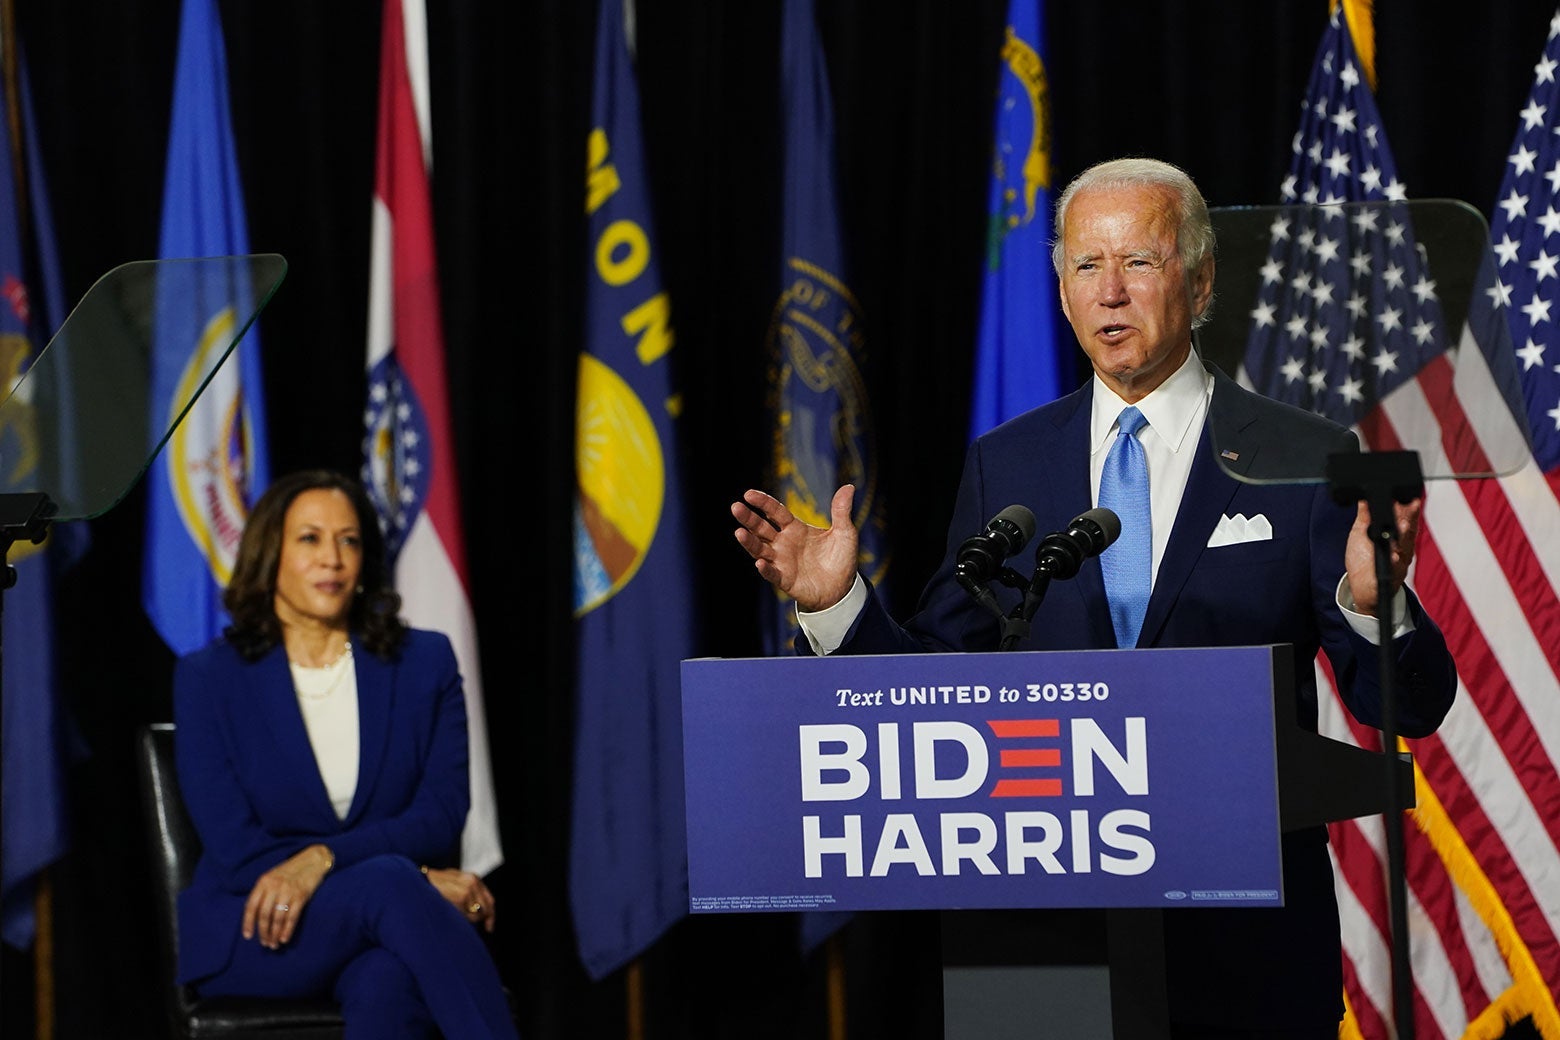 Biden gestures with his arms while speaking at a podium. Harris is seated behind him onstage.